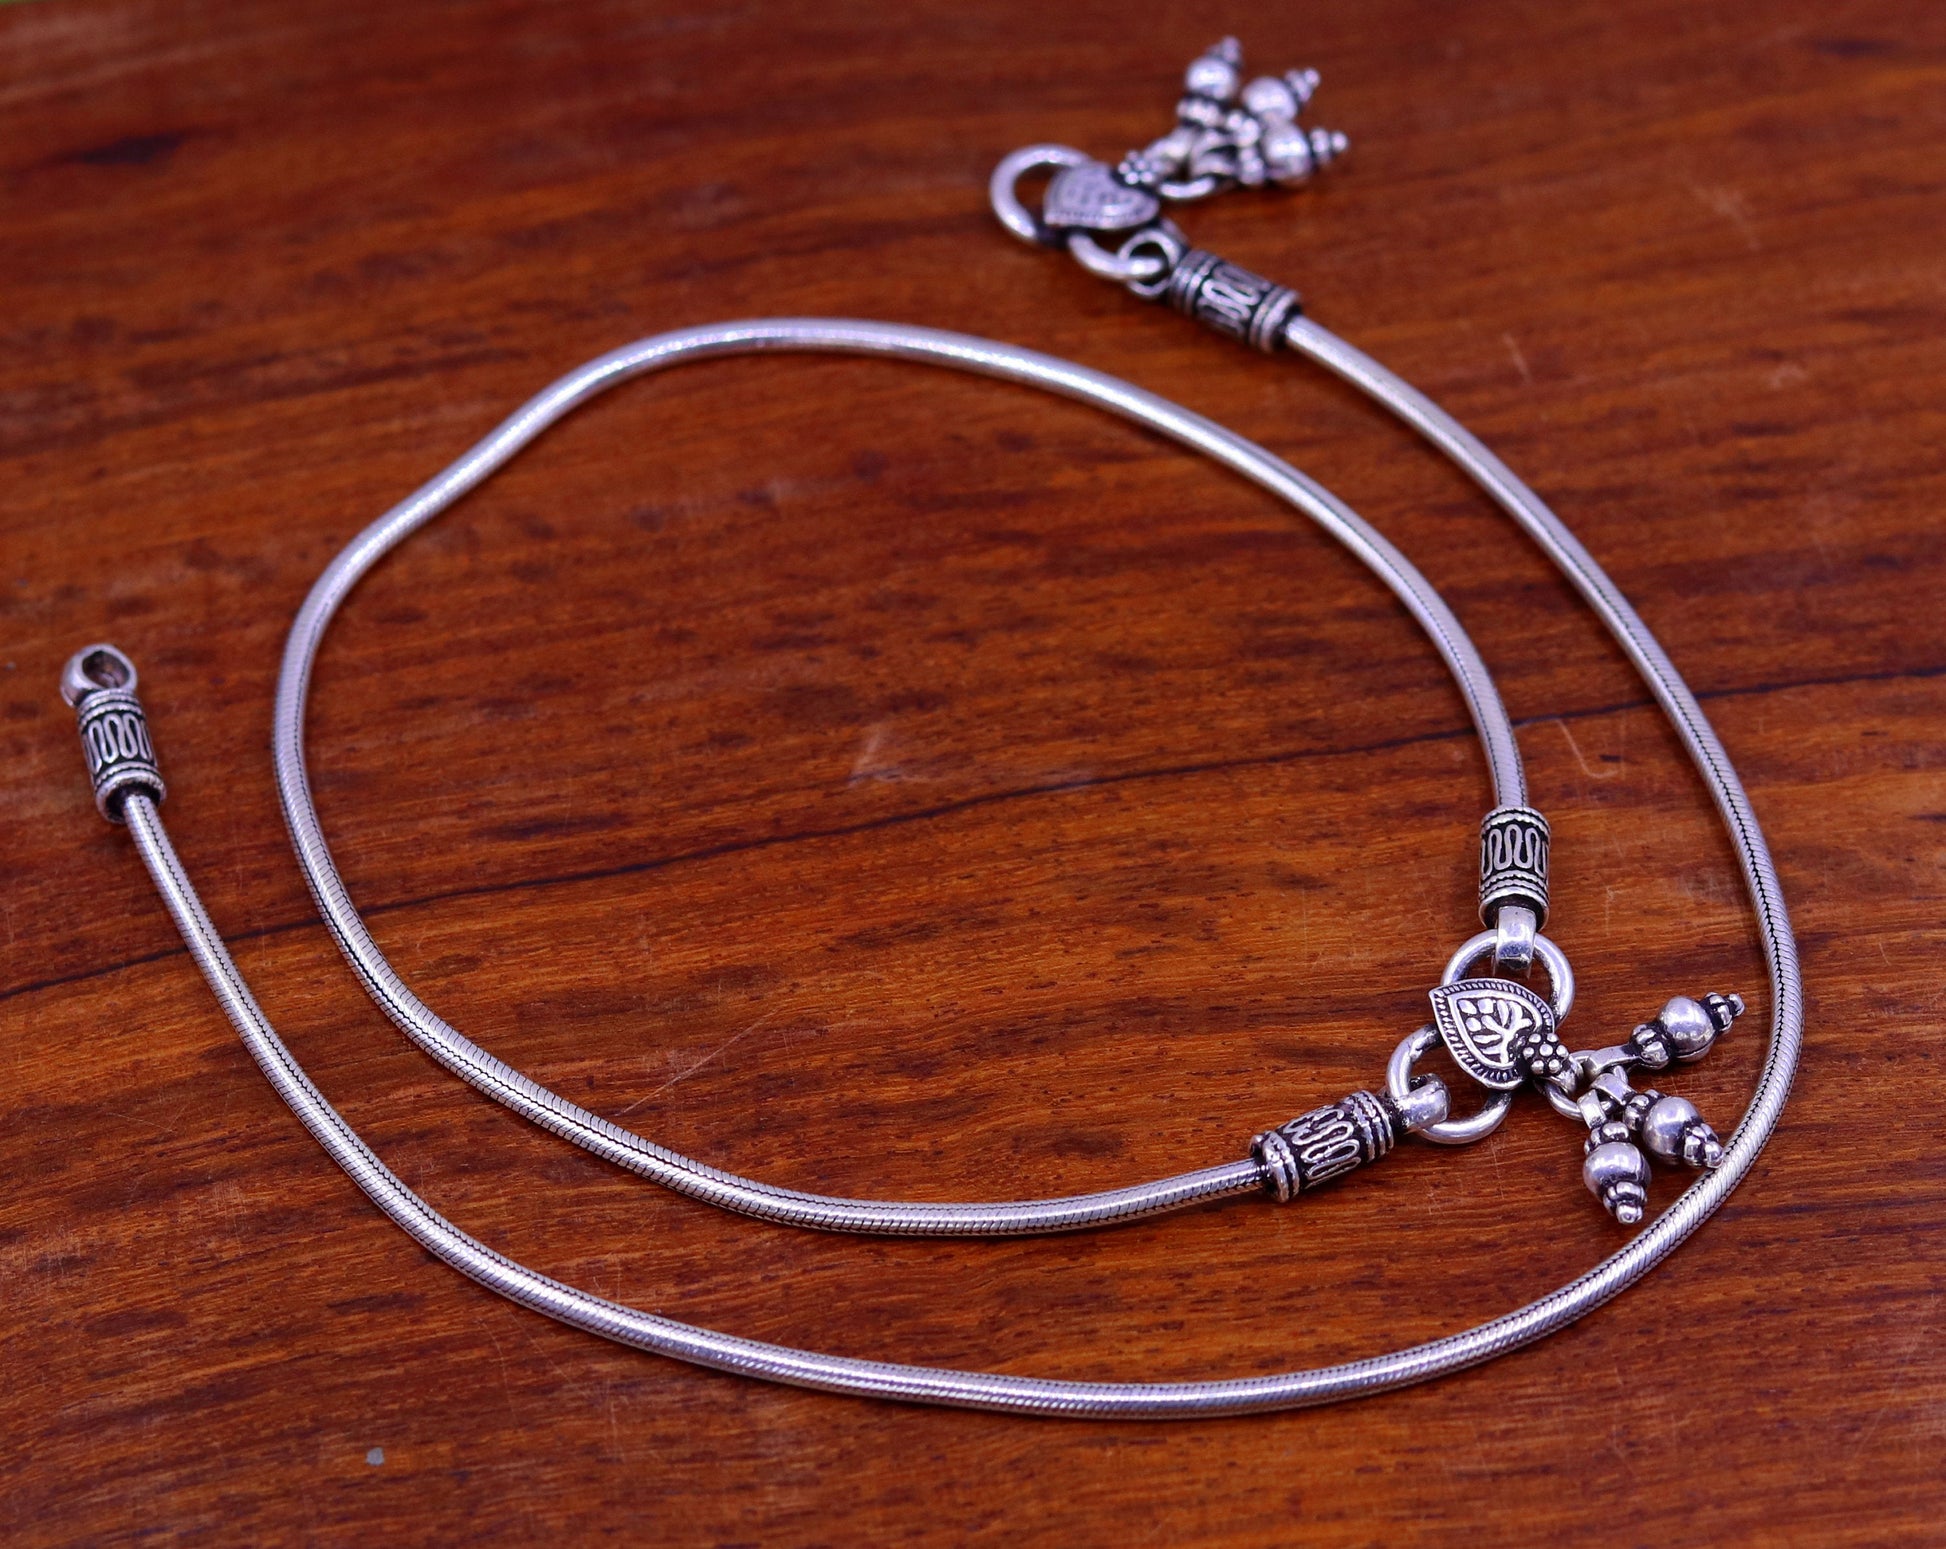 Handmade fabulous snake chain 925 sterling silver ankle bracelet, silver anklets, foot bracelet amazing belly dance jewelry gift her ank149 - TRIBAL ORNAMENTS